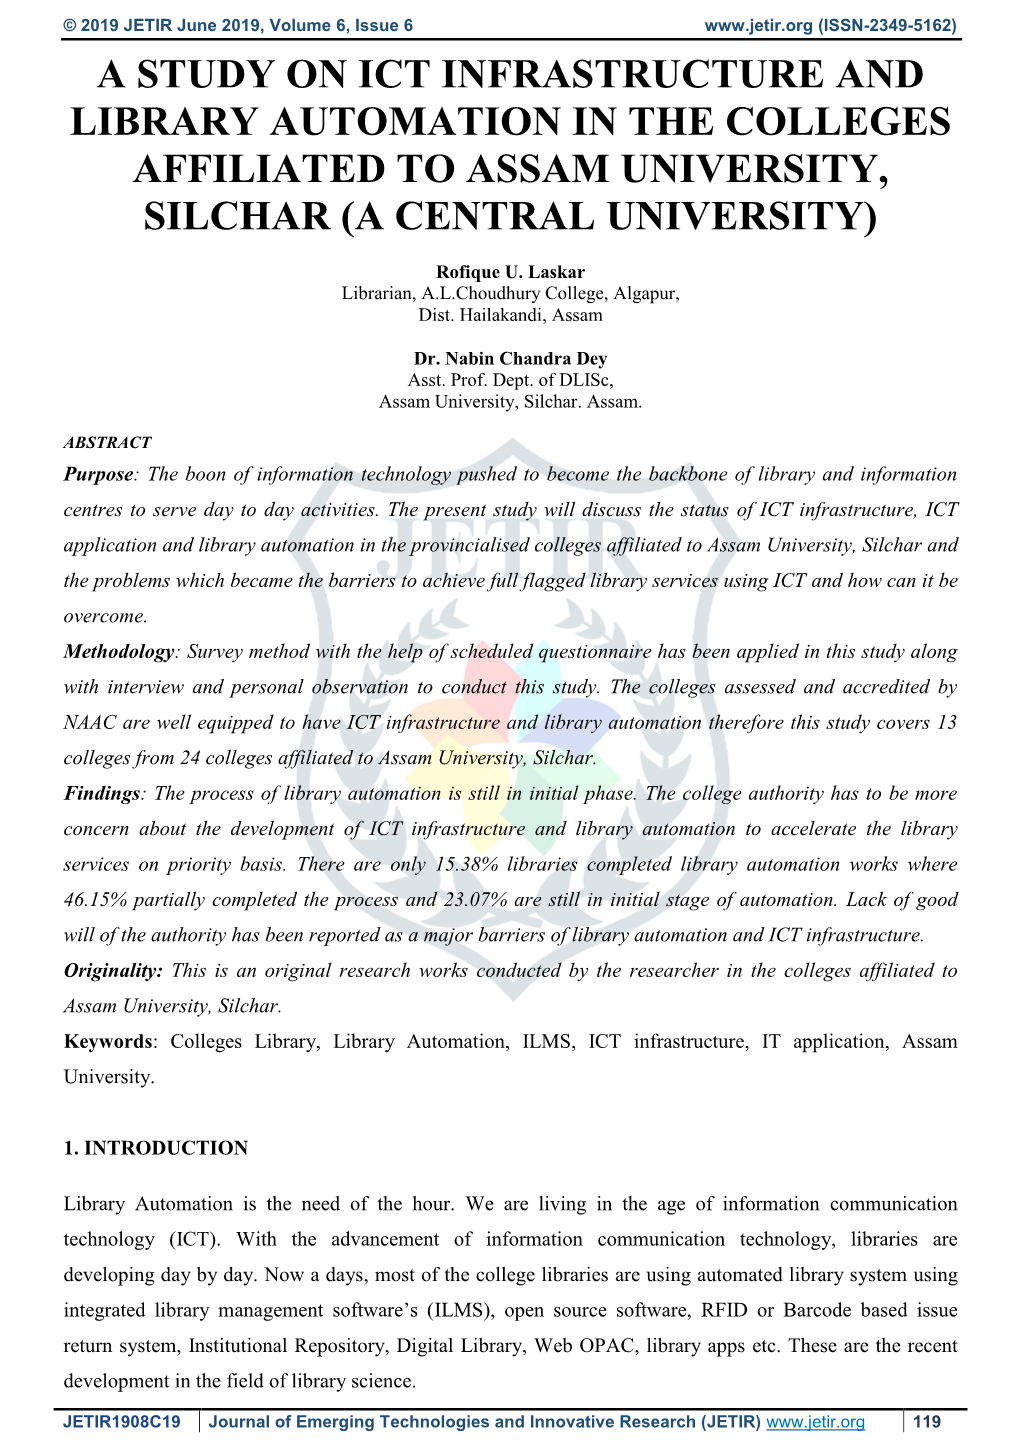 A Study on Ict Infrastructure and Library Automation in the Colleges Affiliated to Assam University, Silchar (A Central University)